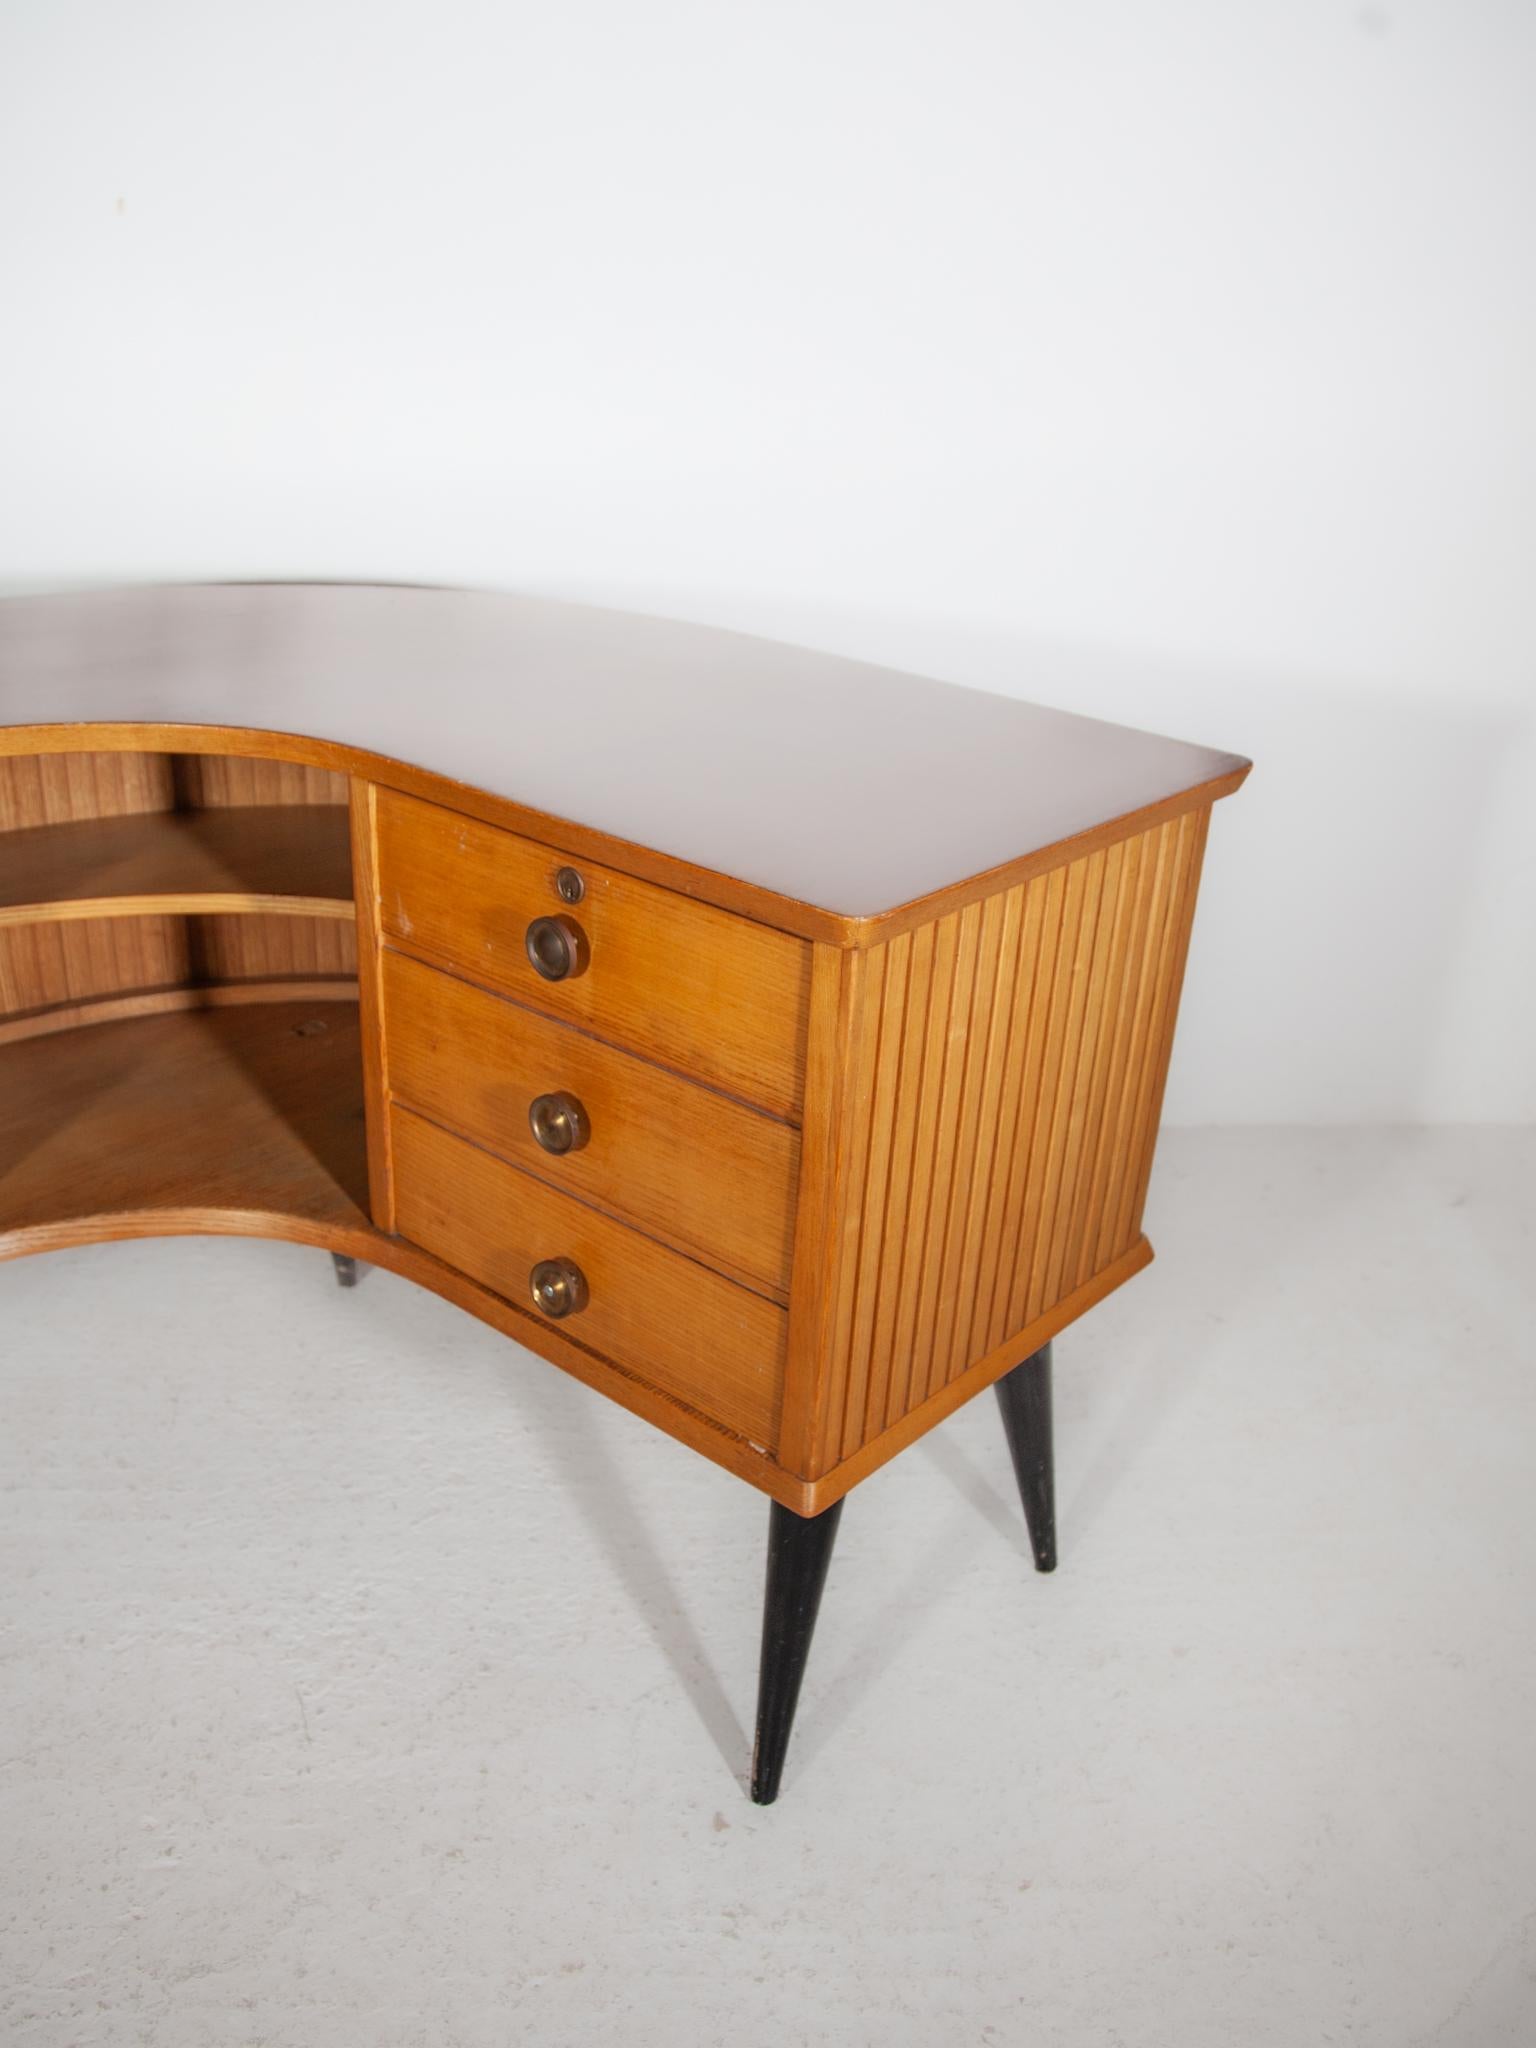 Boomerang Shaped Desk, Shop Counter, 1950s by Alfred Hendrickx In Good Condition For Sale In Antwerp, BE